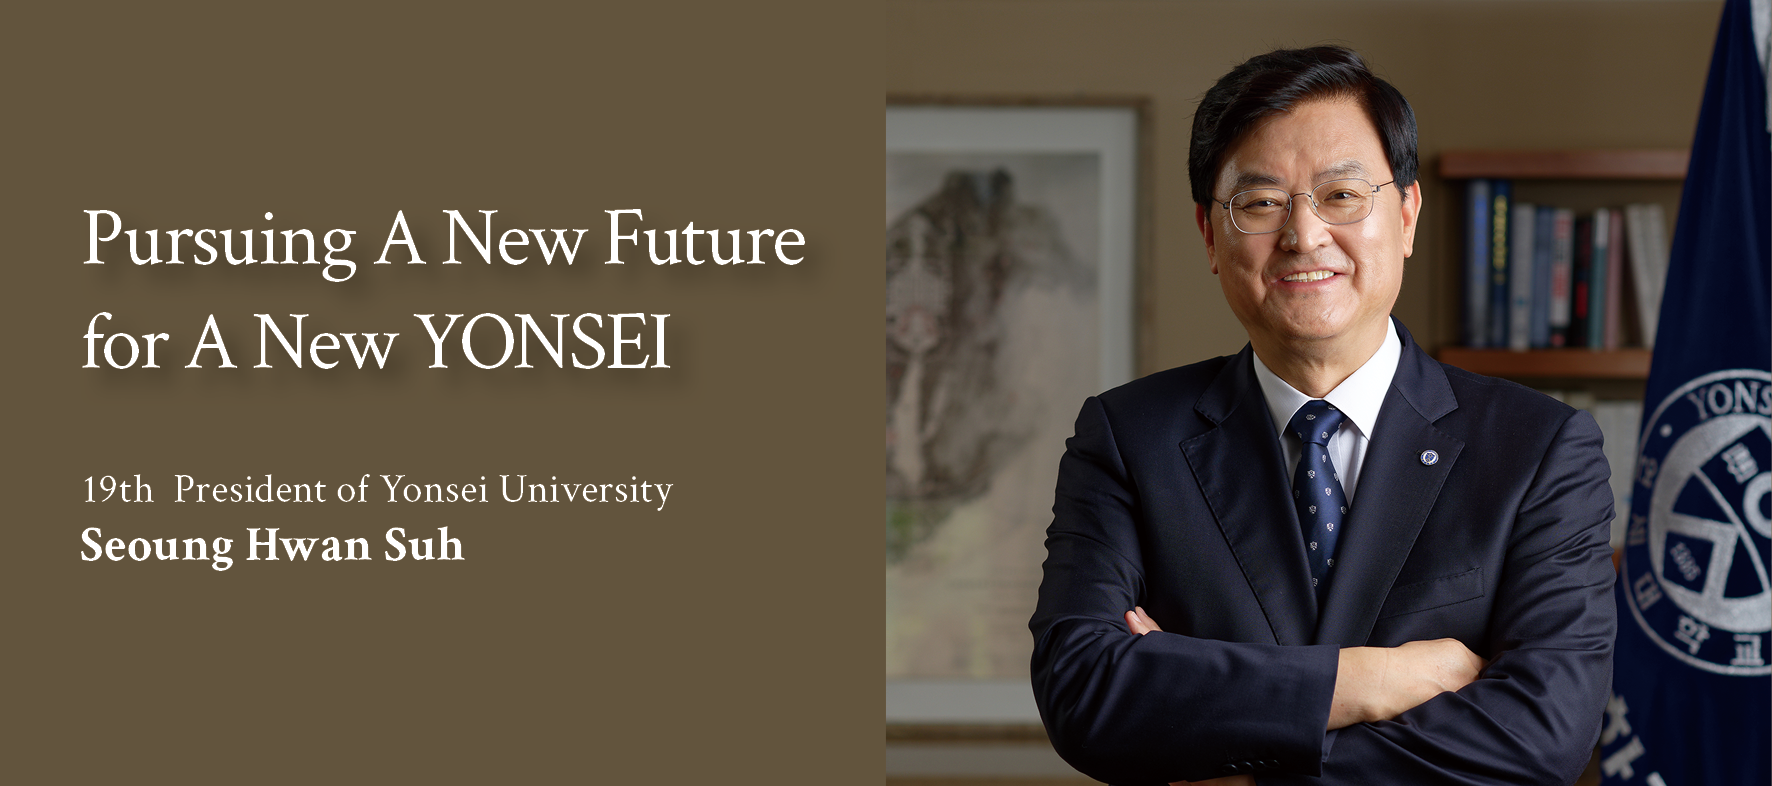 Pursuing A New Future for A New Yonsei. 19th President of Yonsei University Seoung Hwan Suh